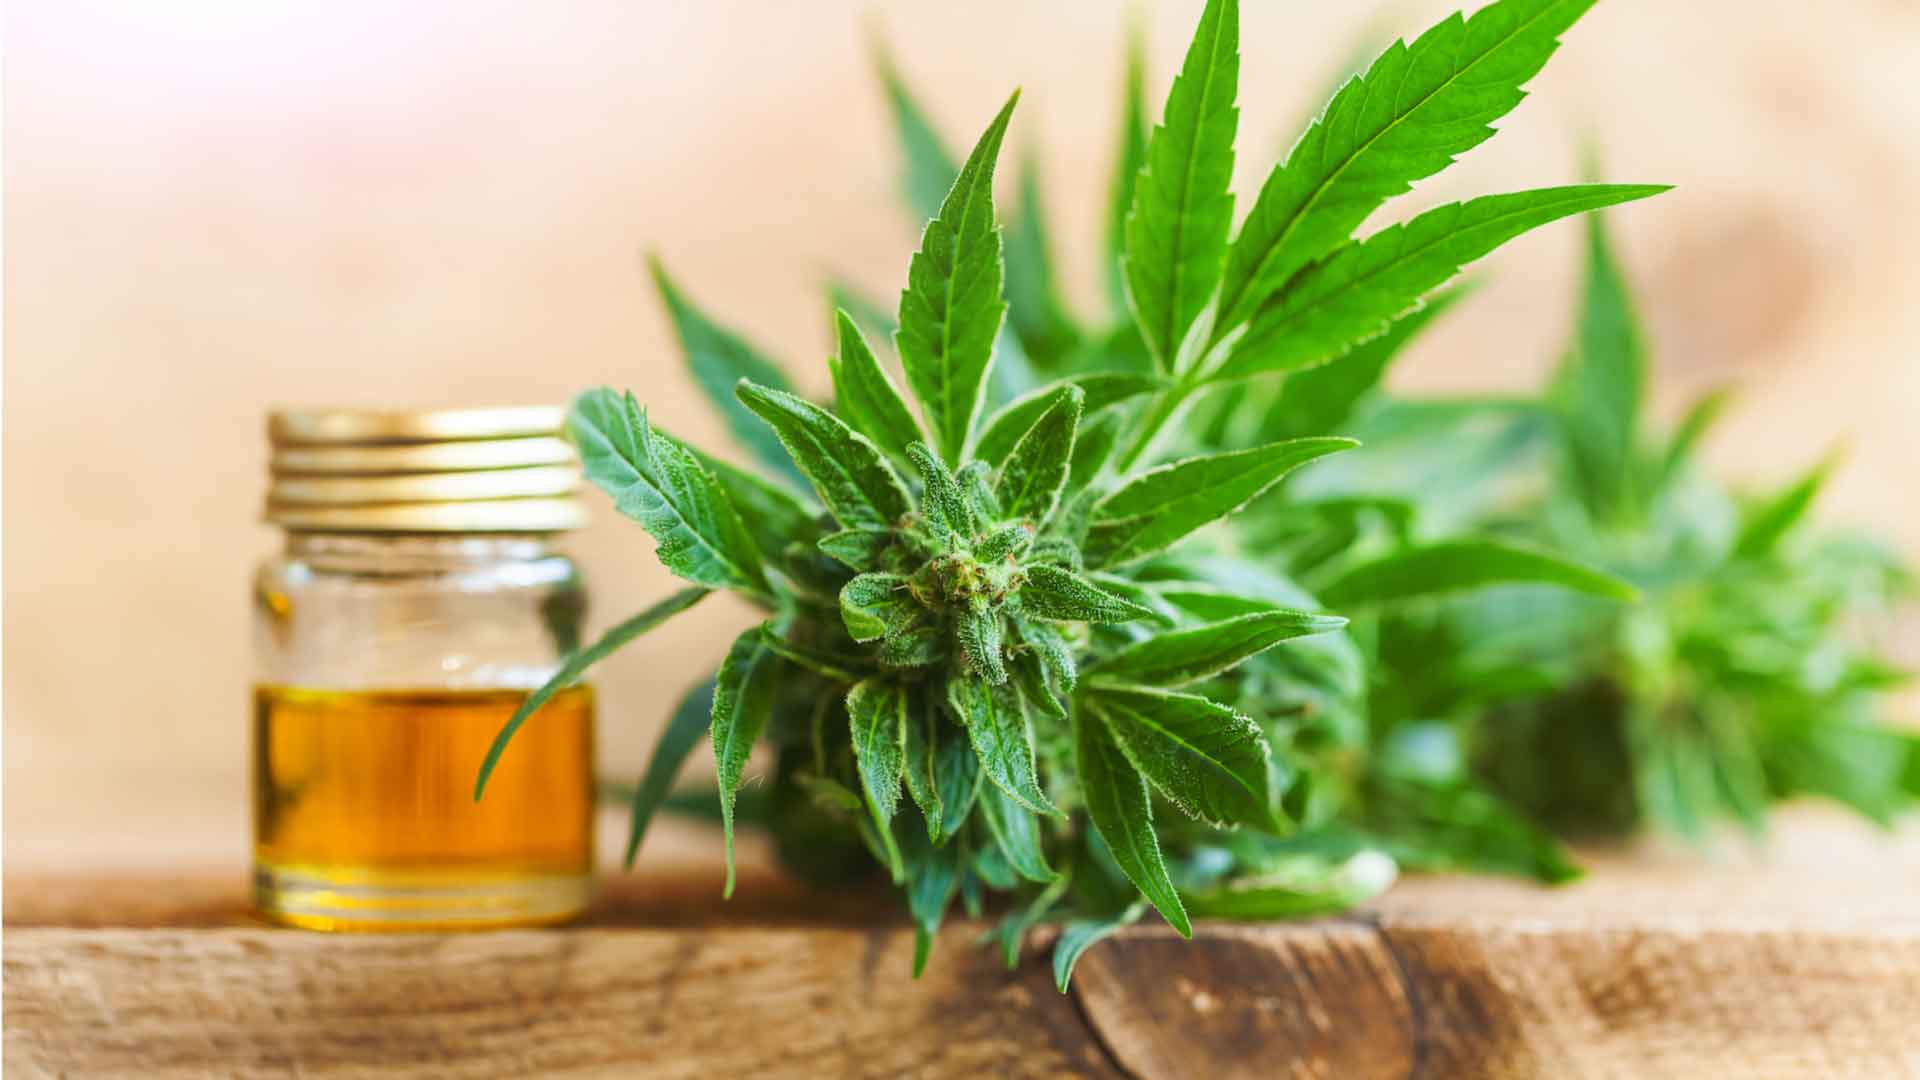 Skincare Benefits Associated With The Consumption Of Hemp Oil